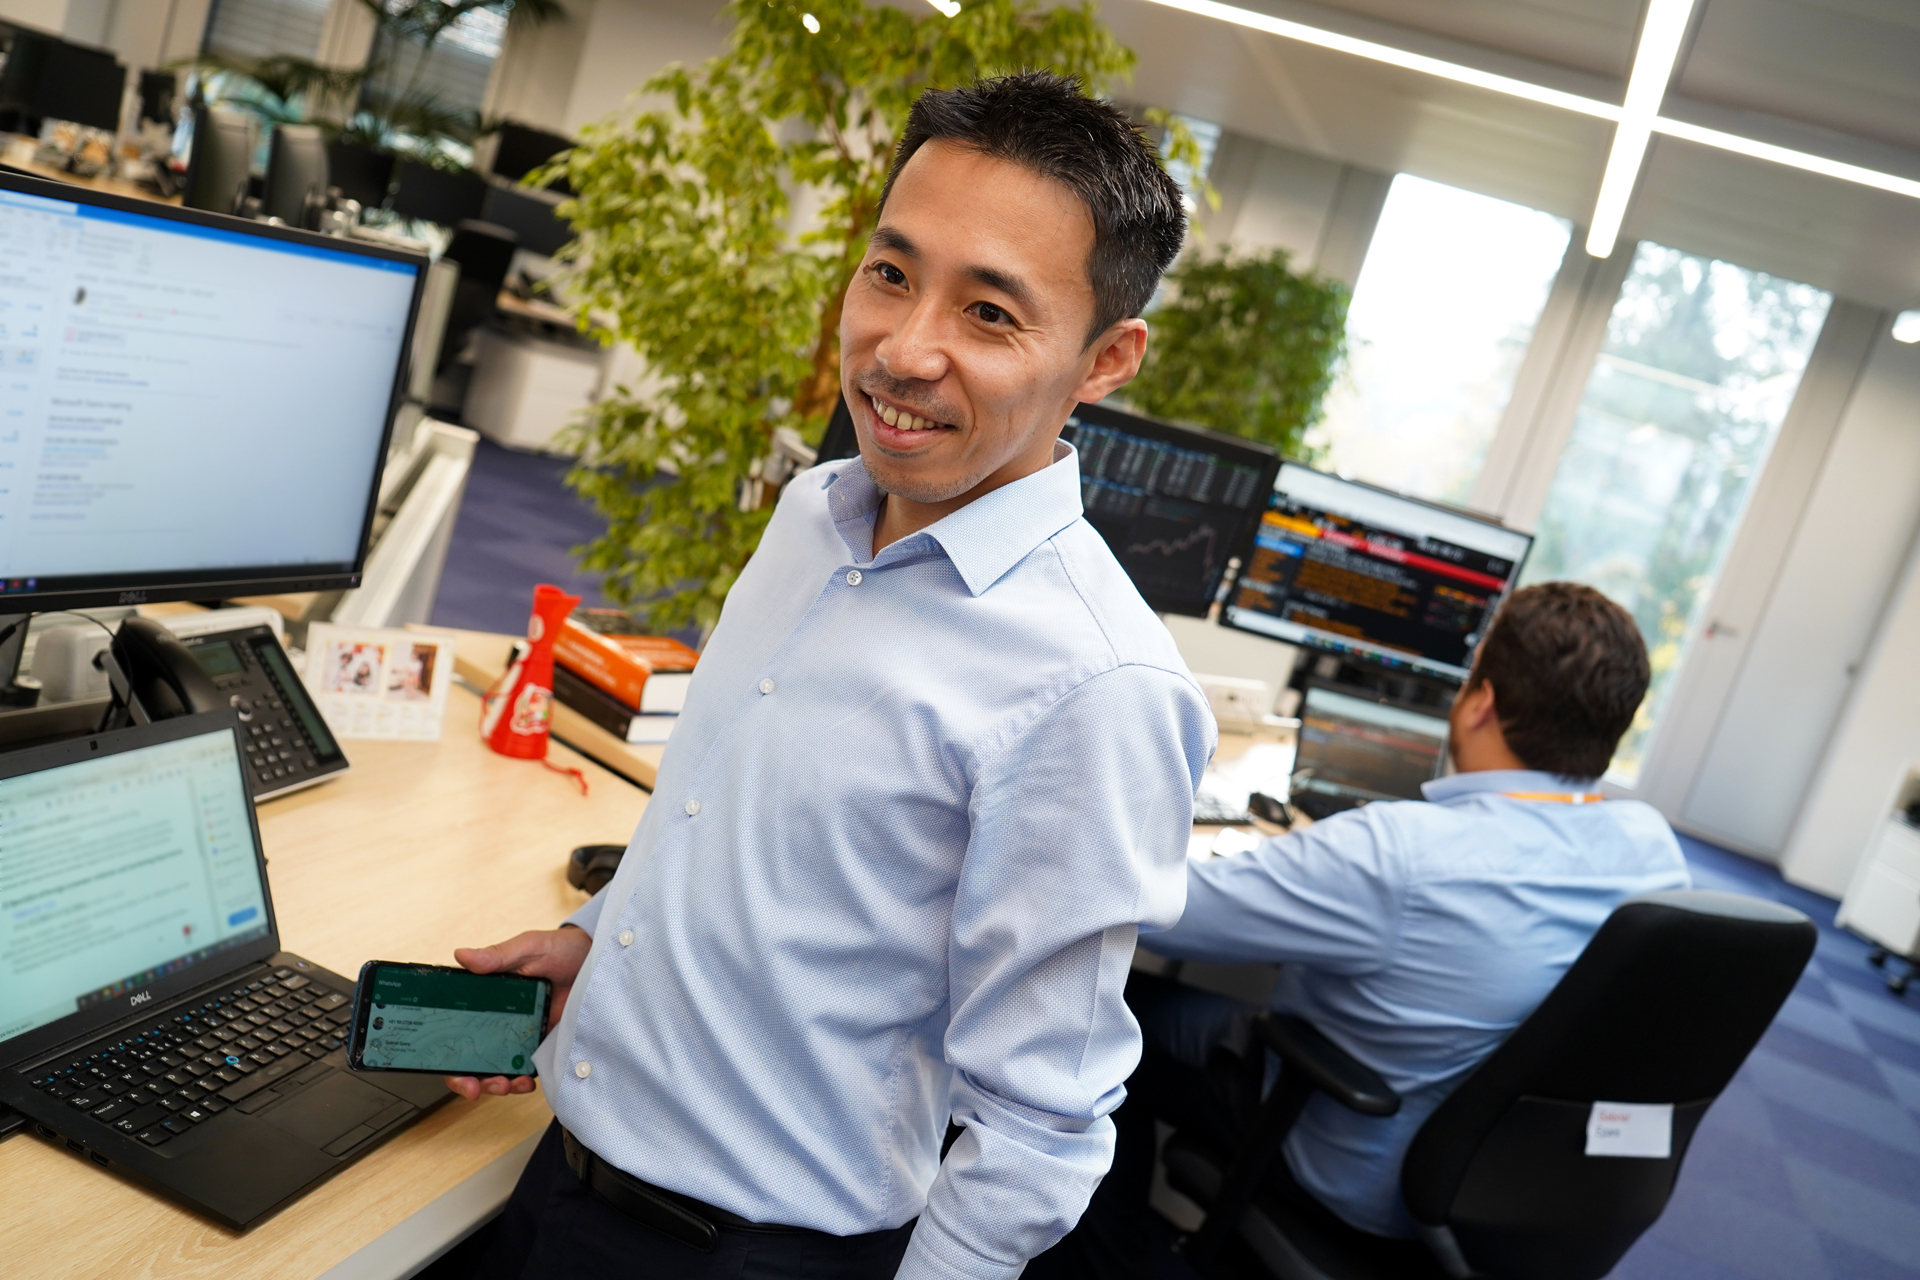 Tetsuya Watanabe's role is to optimise the global trade in feed grain, mainly corn, for COFCO International by connecting origins and destinations